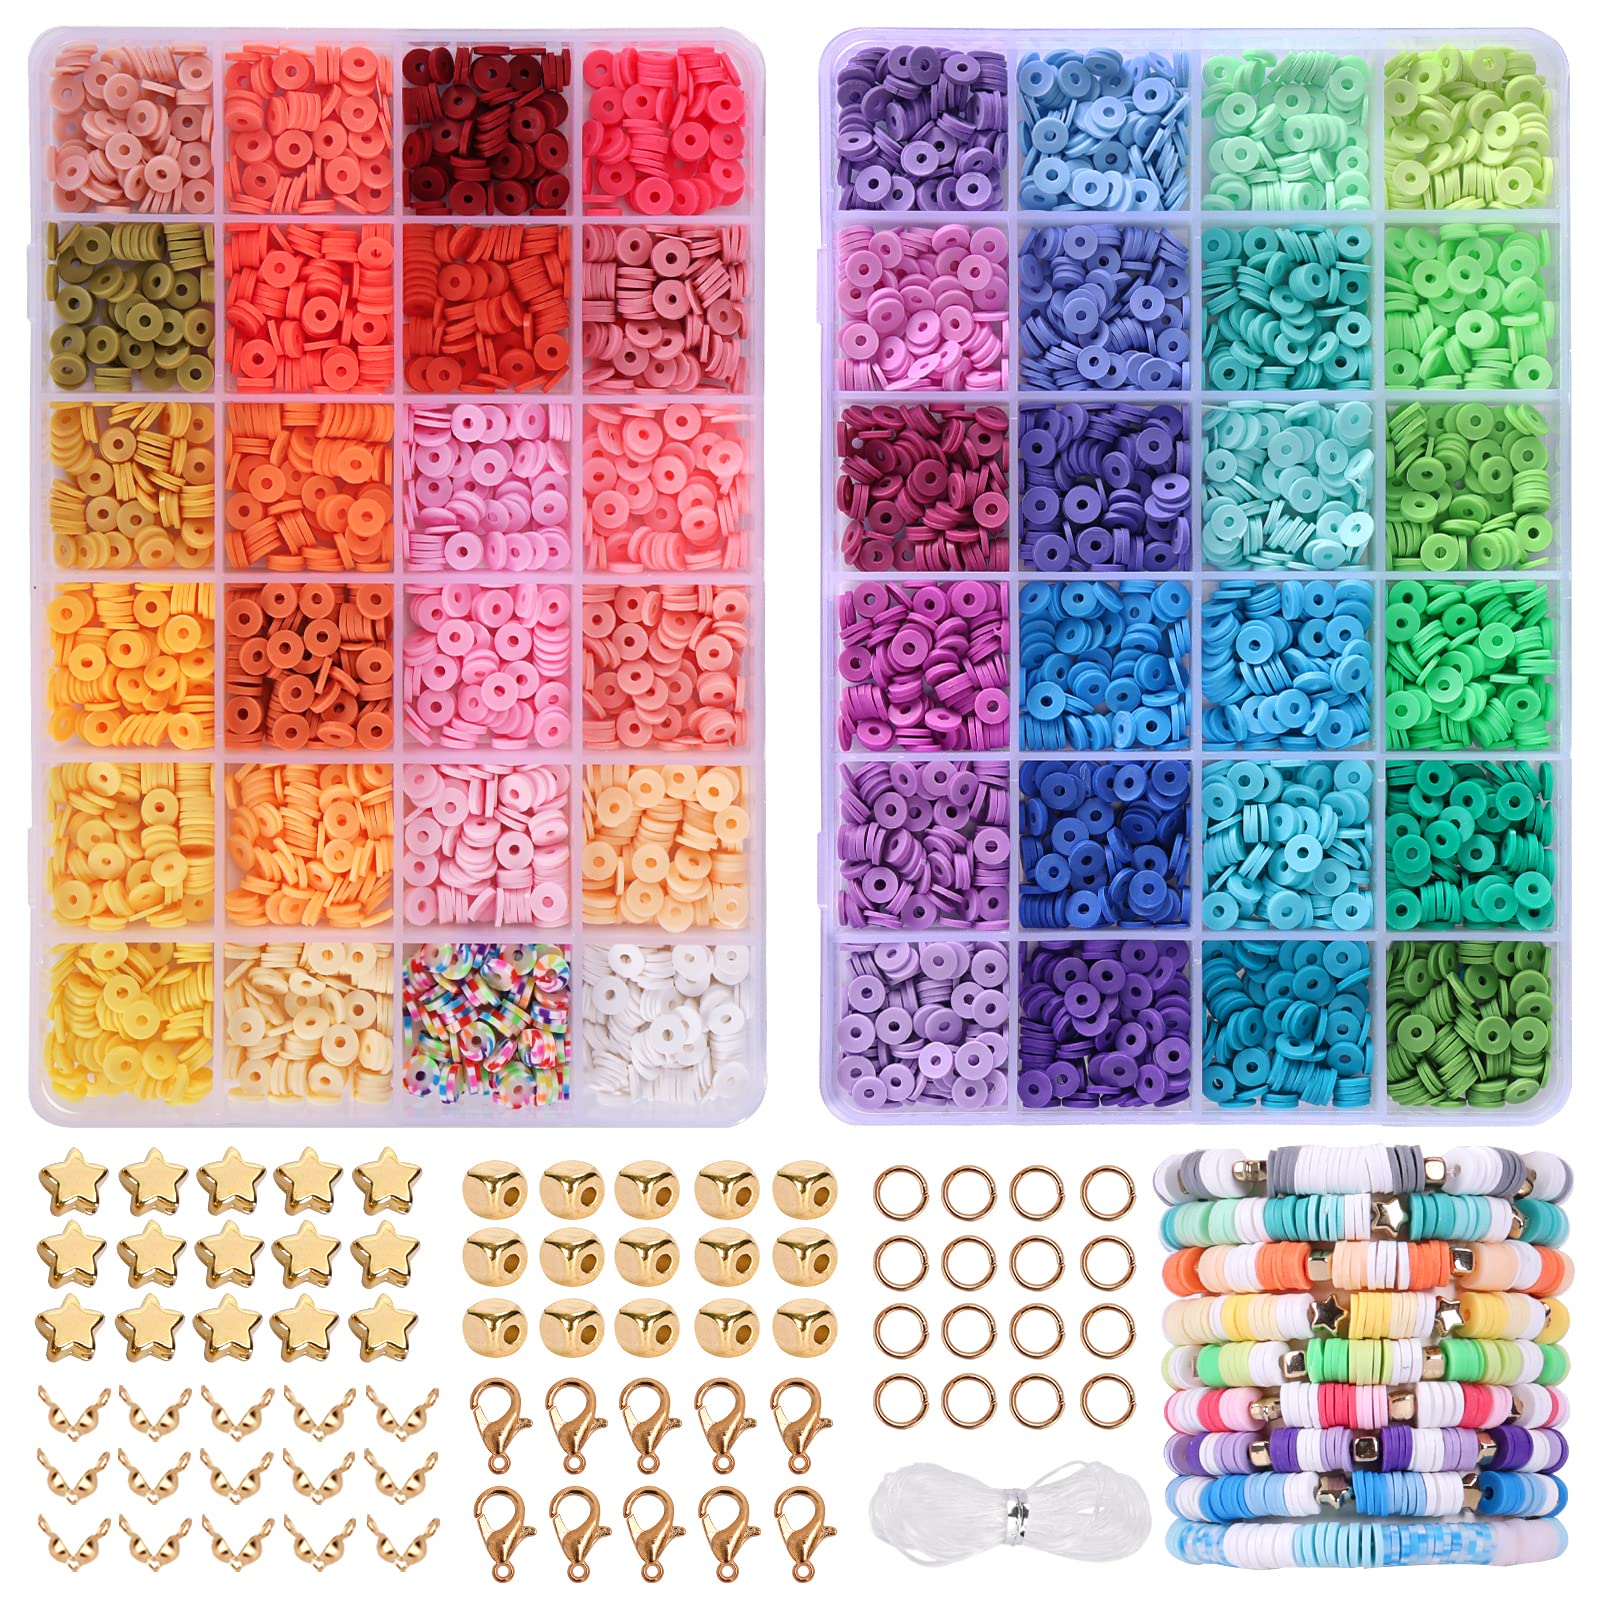 Amazon.com: Gaspletu 700PCS Glass Beads for Jewelry Making, 24 Colors 8mm  Crystal Beads Bracelets Making Kit, 1 Box Round Beads Suitable for Beginners